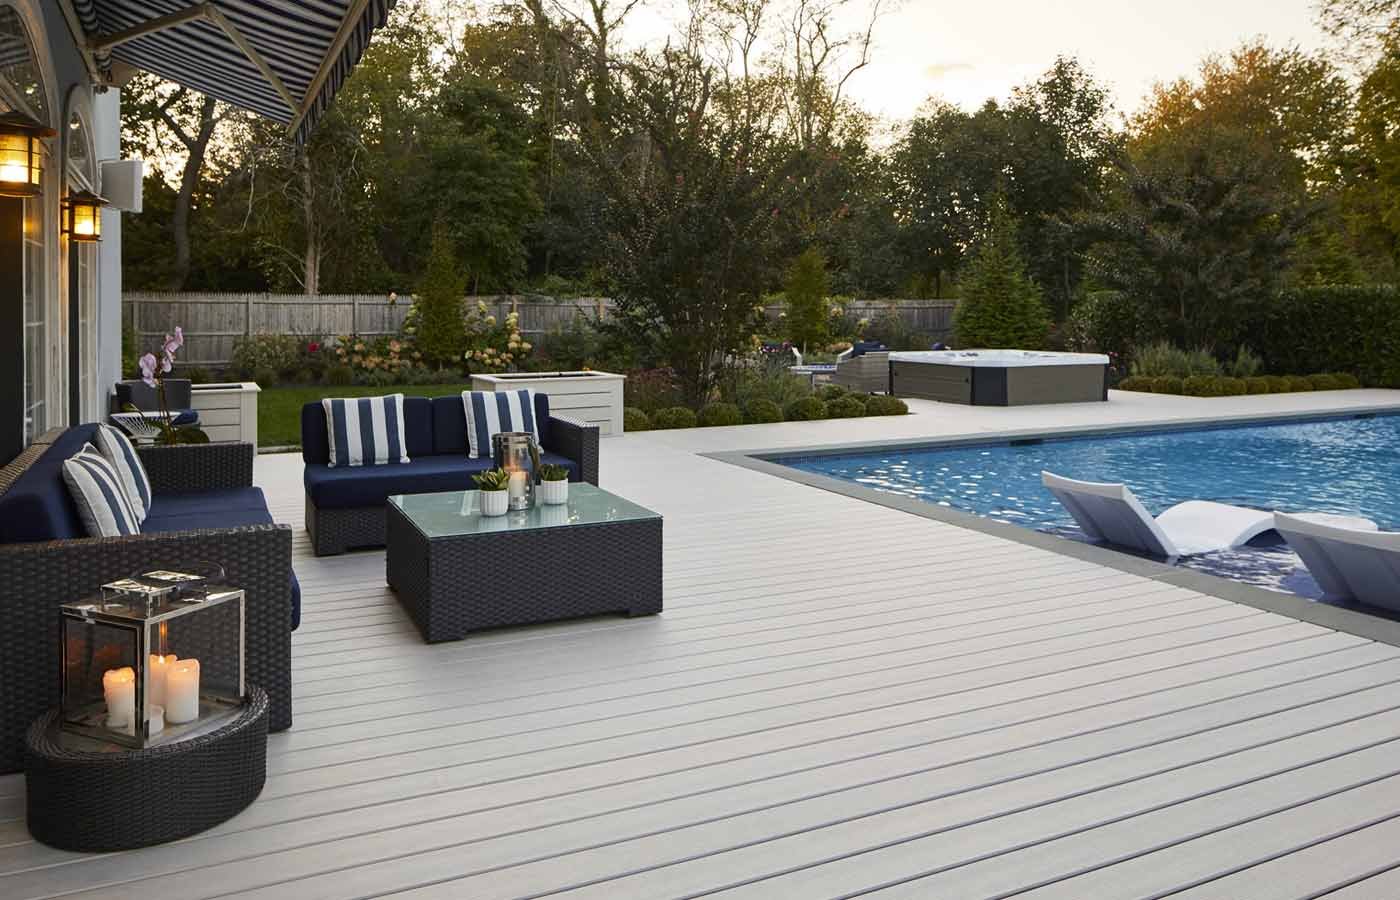 A pool with a deck, a sitting area, a hot tub and some plants around the yard